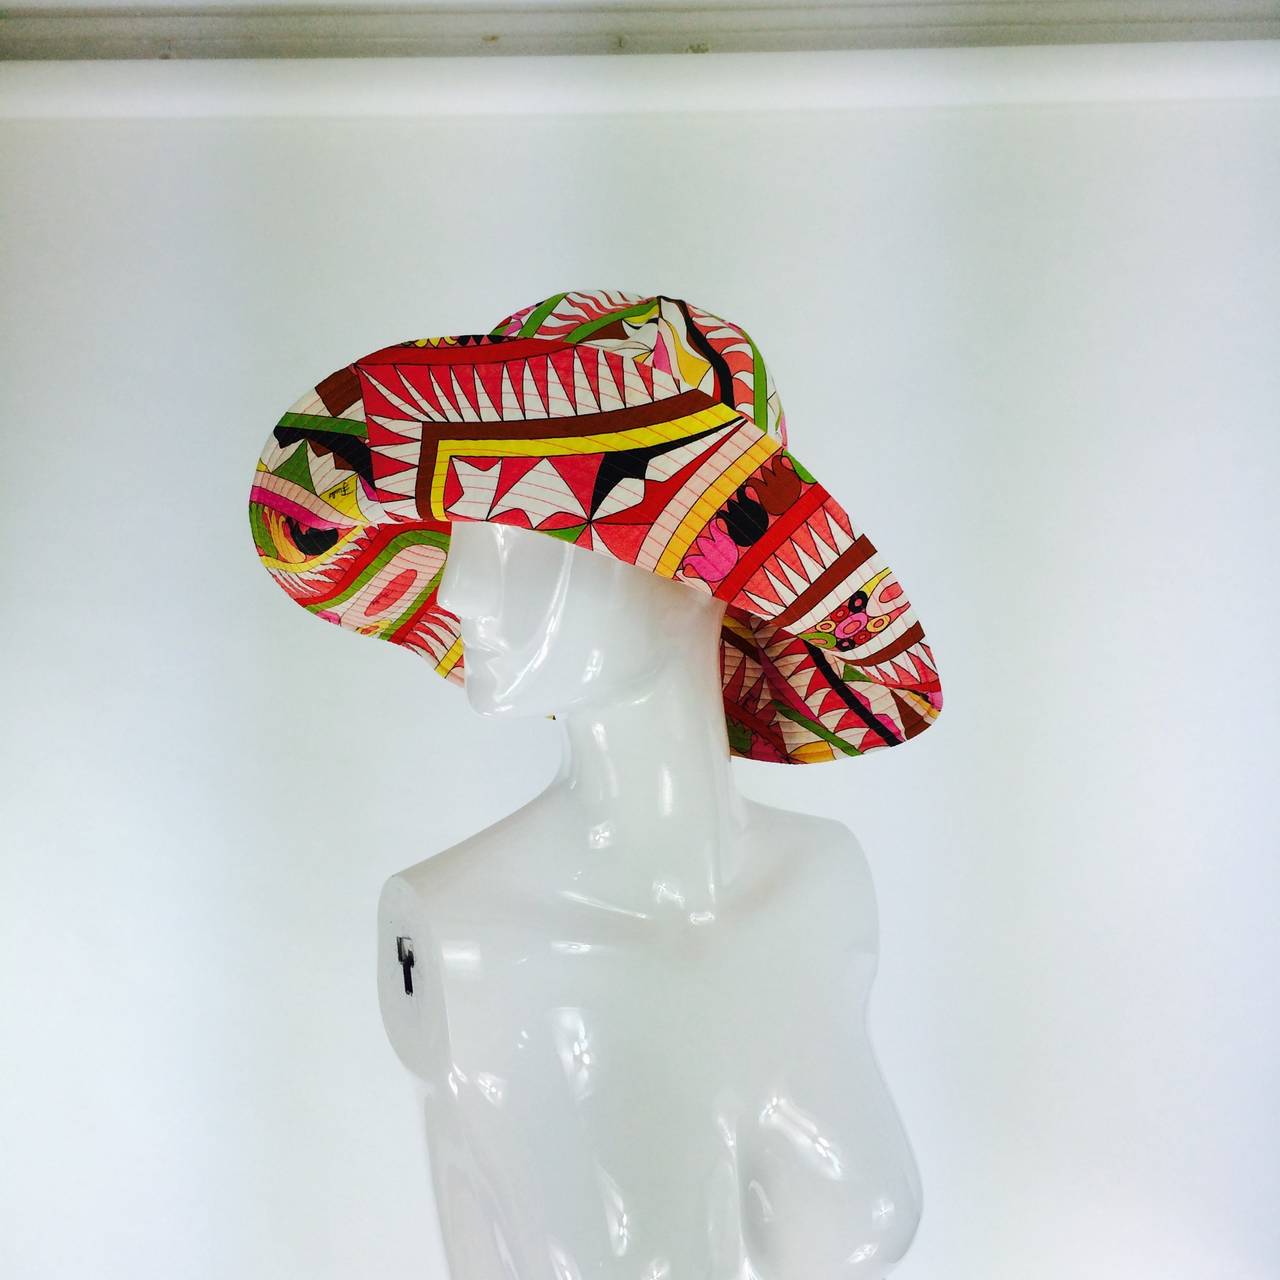 From the early 21st century a wonderful Pucci wide brim sun hat...Bright colours in the geometric designs Pucci was famous for...All cotton...

Measurements are:
21 3/4